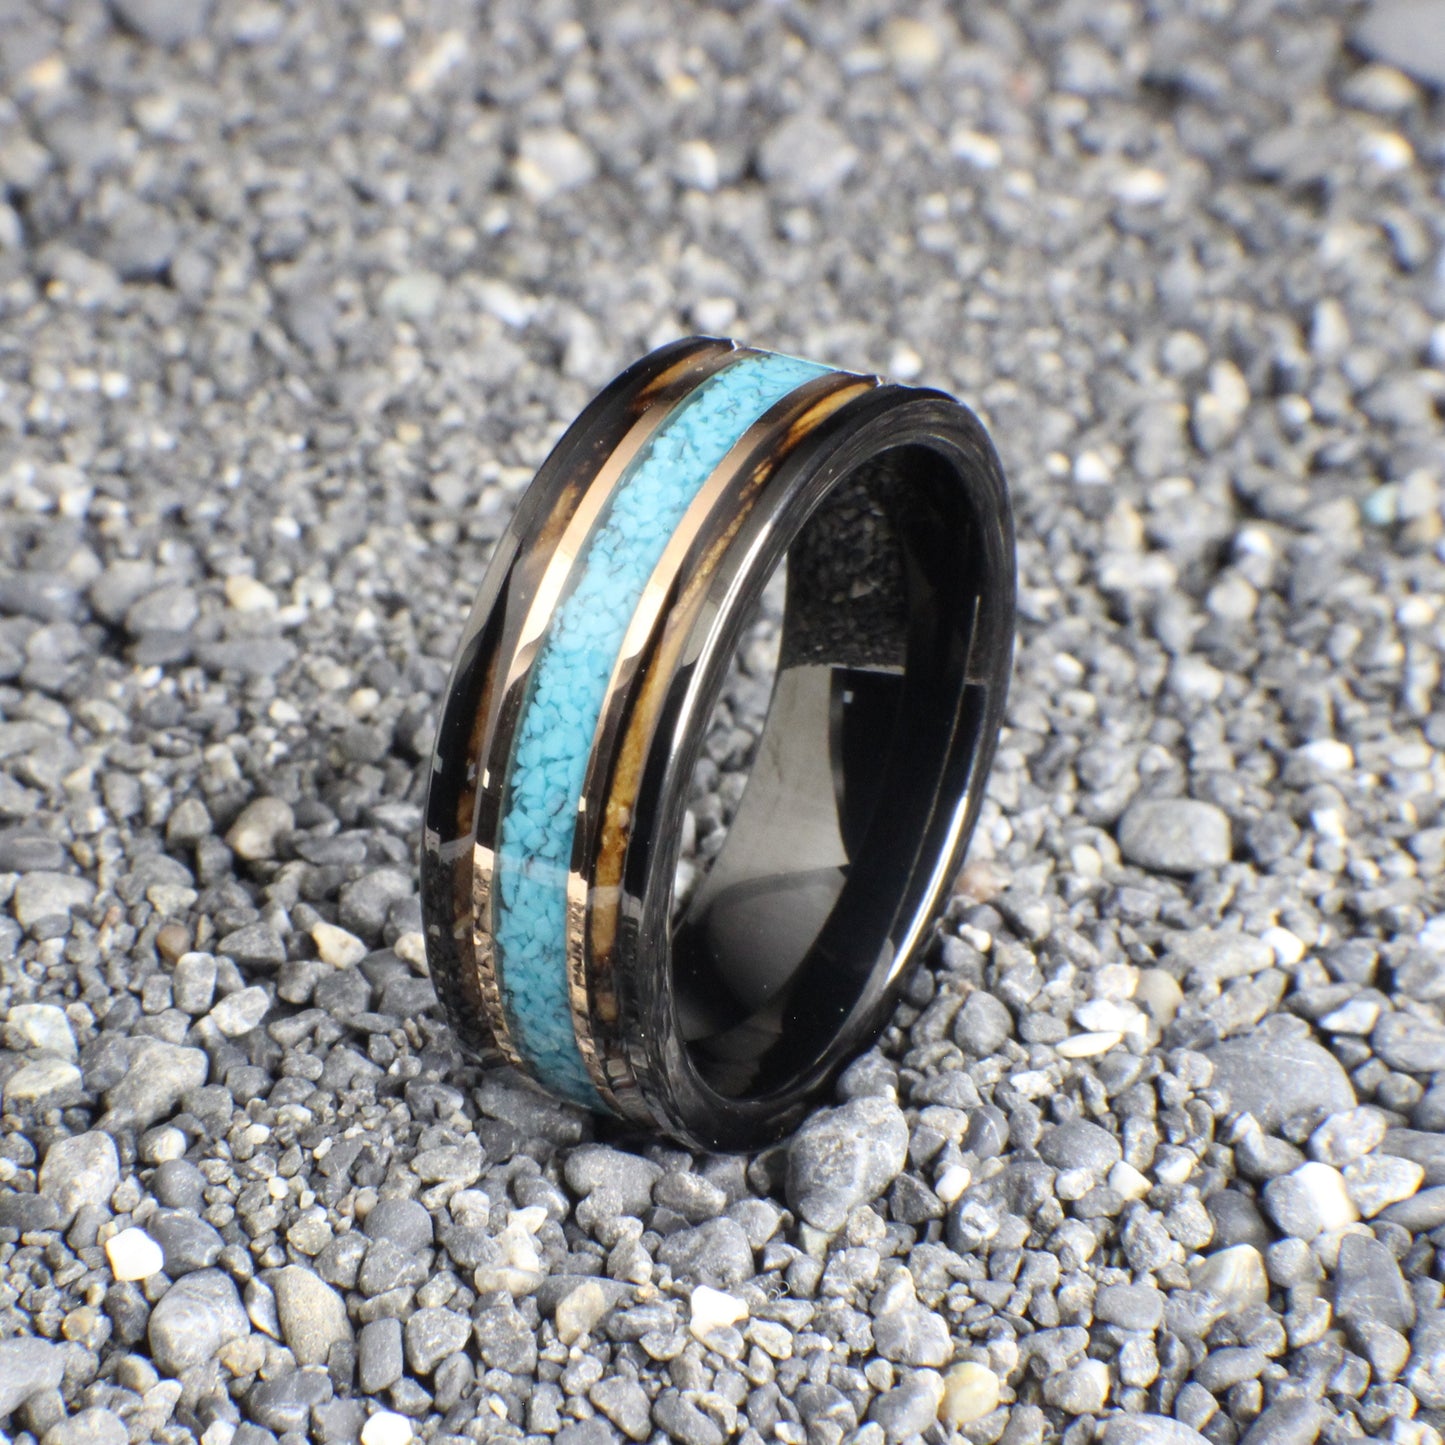 Turquoise Wedding Band with Burnt Whiskey Barrel and Gold Bands